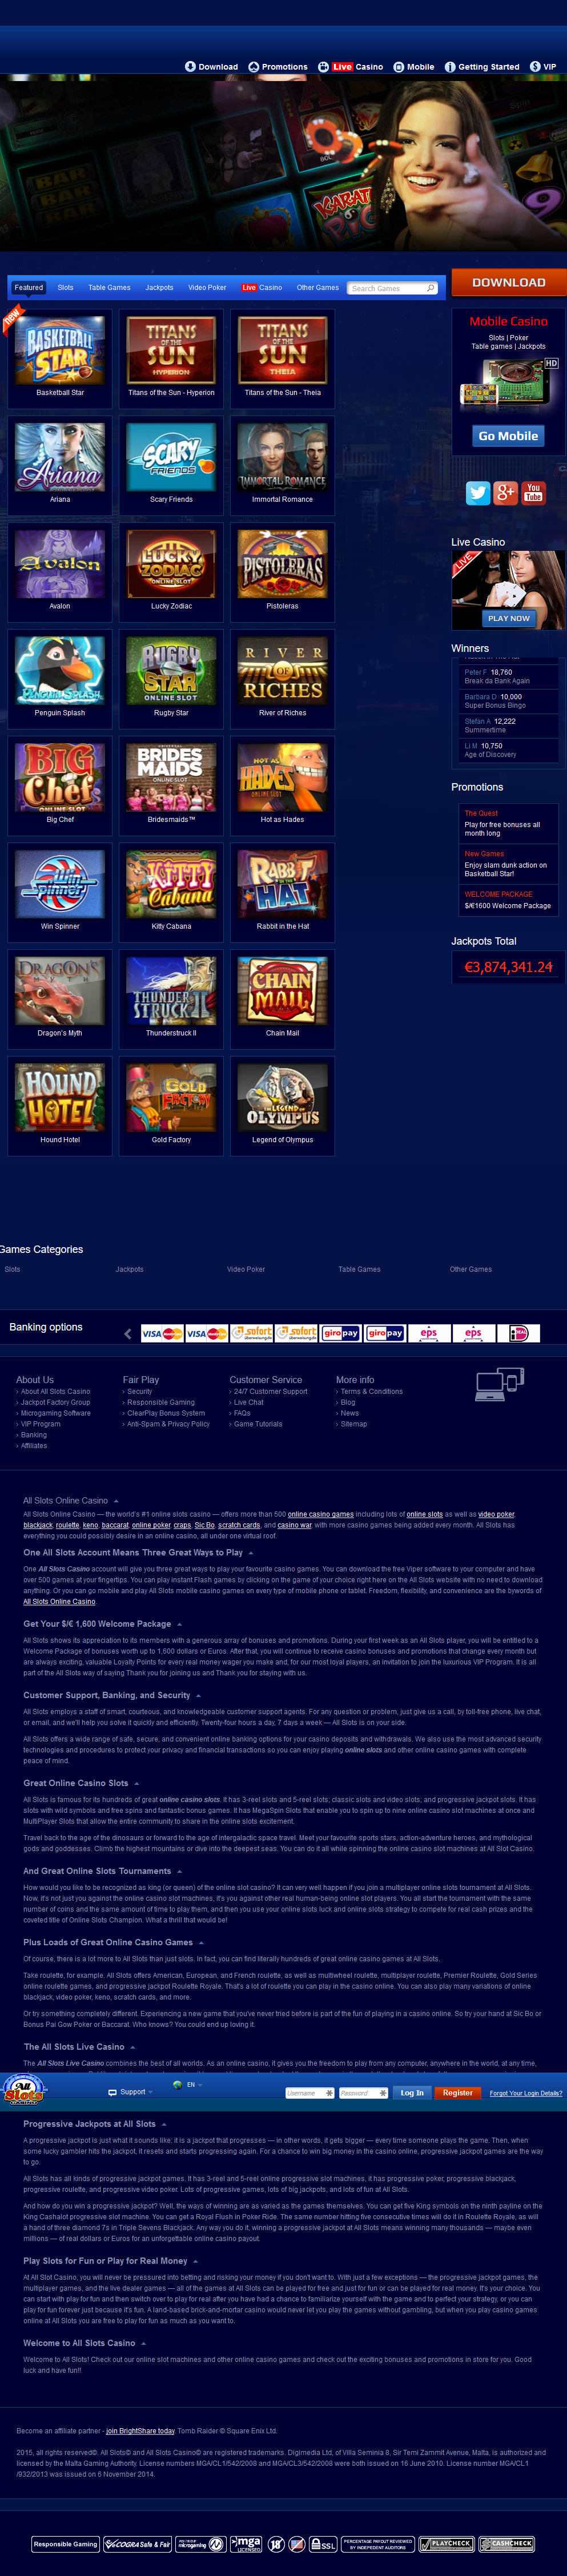 All Slots Casino Test And Review 1500 Bonus